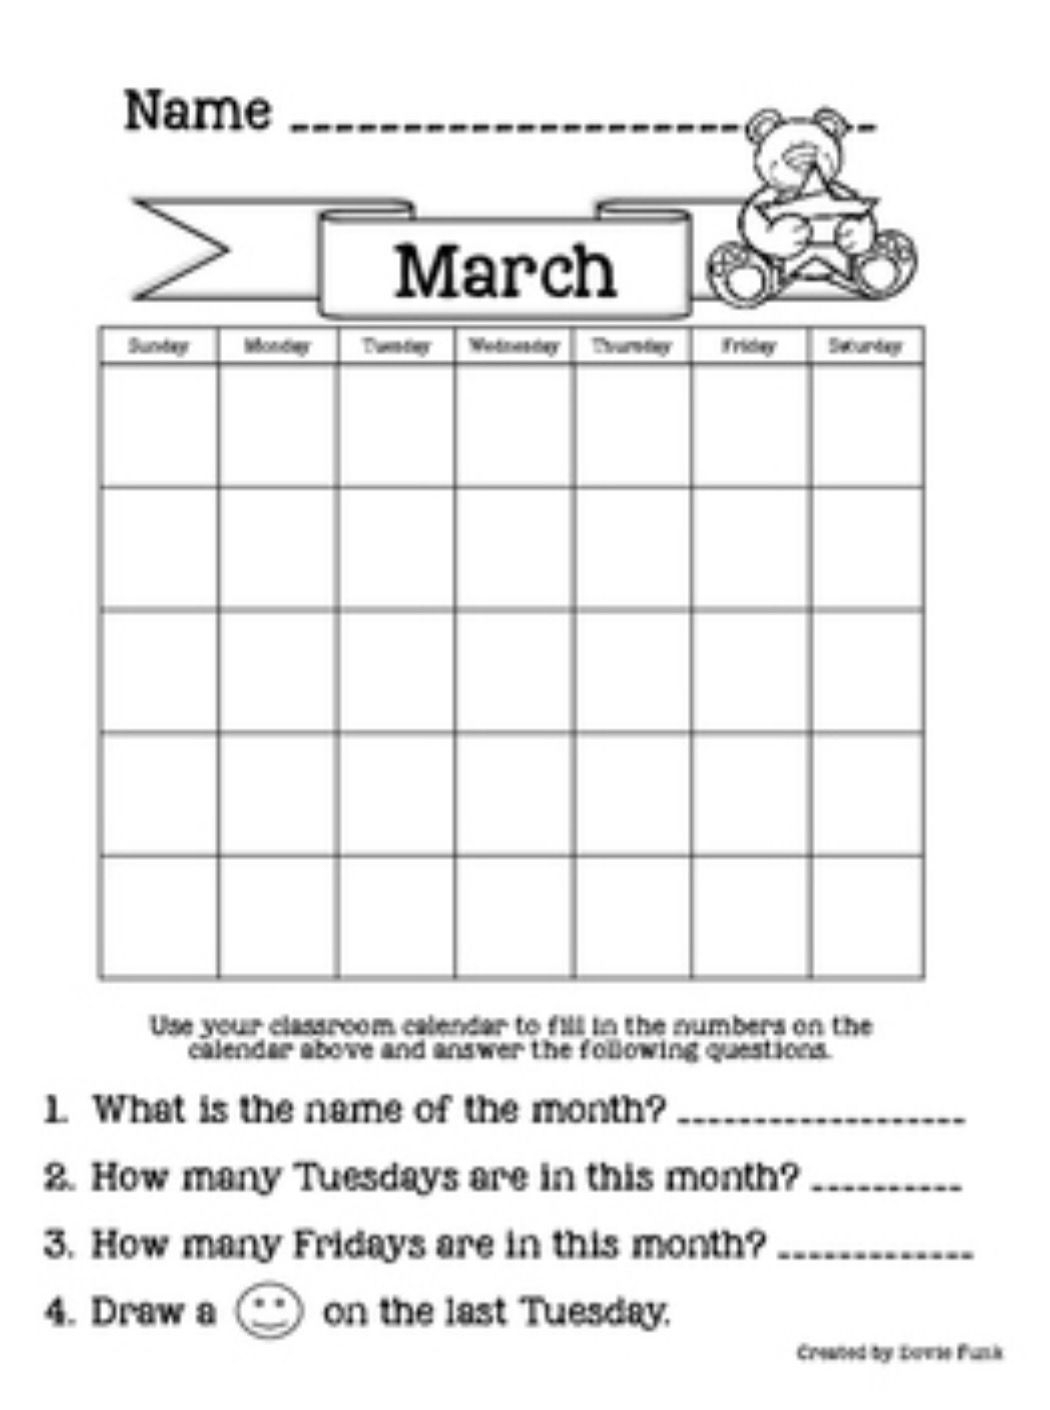 Calendar Activity Worksheets For First And Second Grade